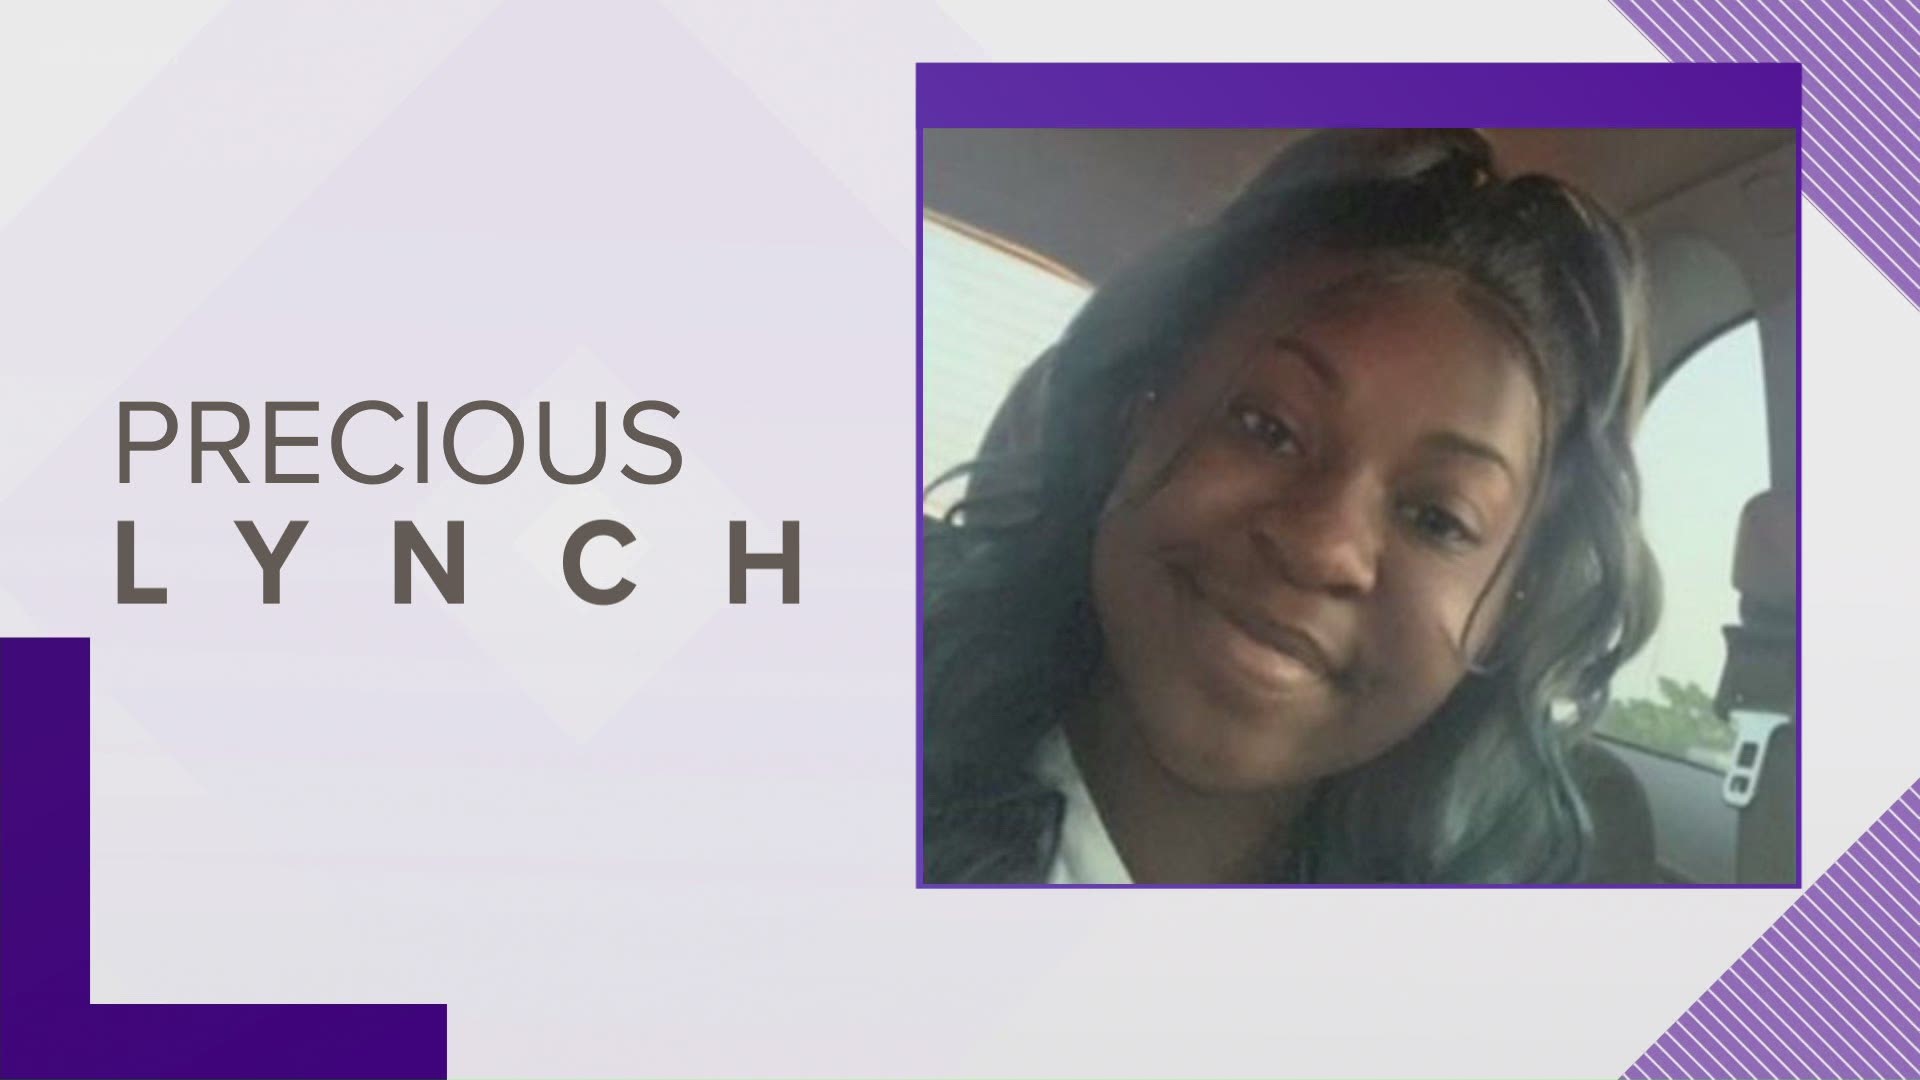 17-year-old Precious Lynch has been missing from her home in Sumter for over a week, if you know where she is call CrimeStoppers 1-888-CrimeSC. .